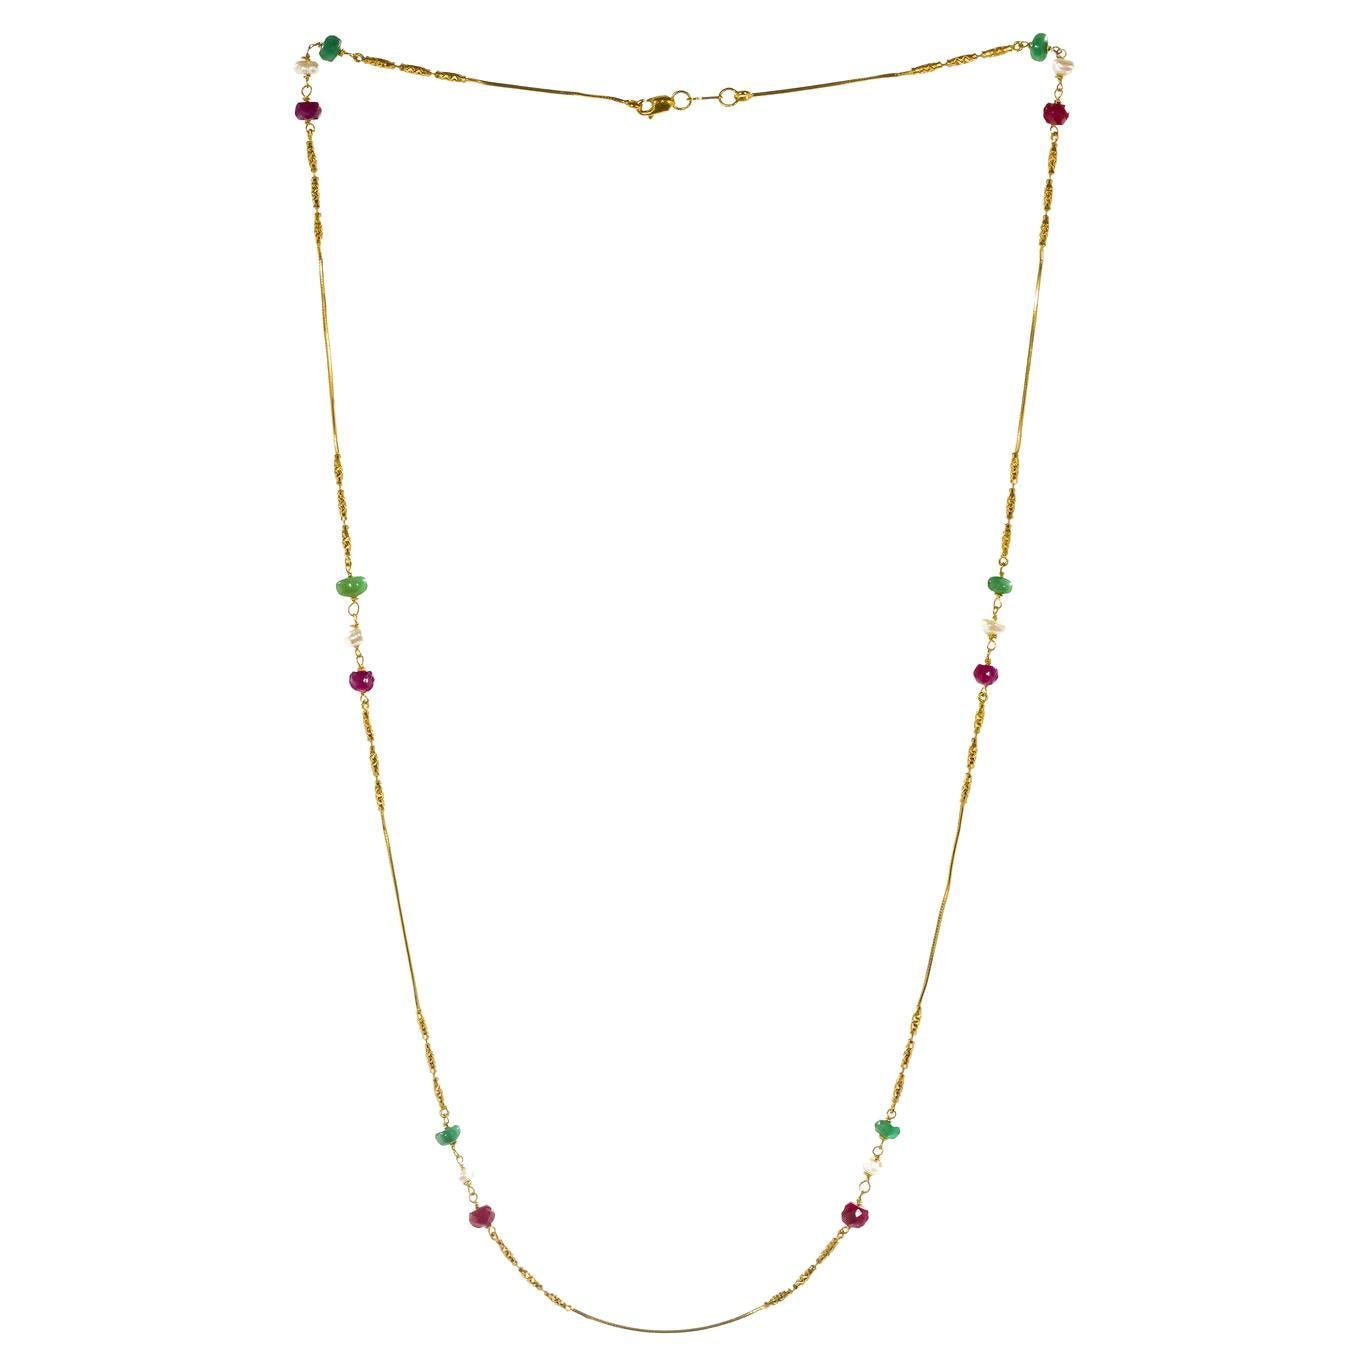 Marriyeh 22K Yellow Gold Chain Necklace with 5 Carats Multicolor Stones